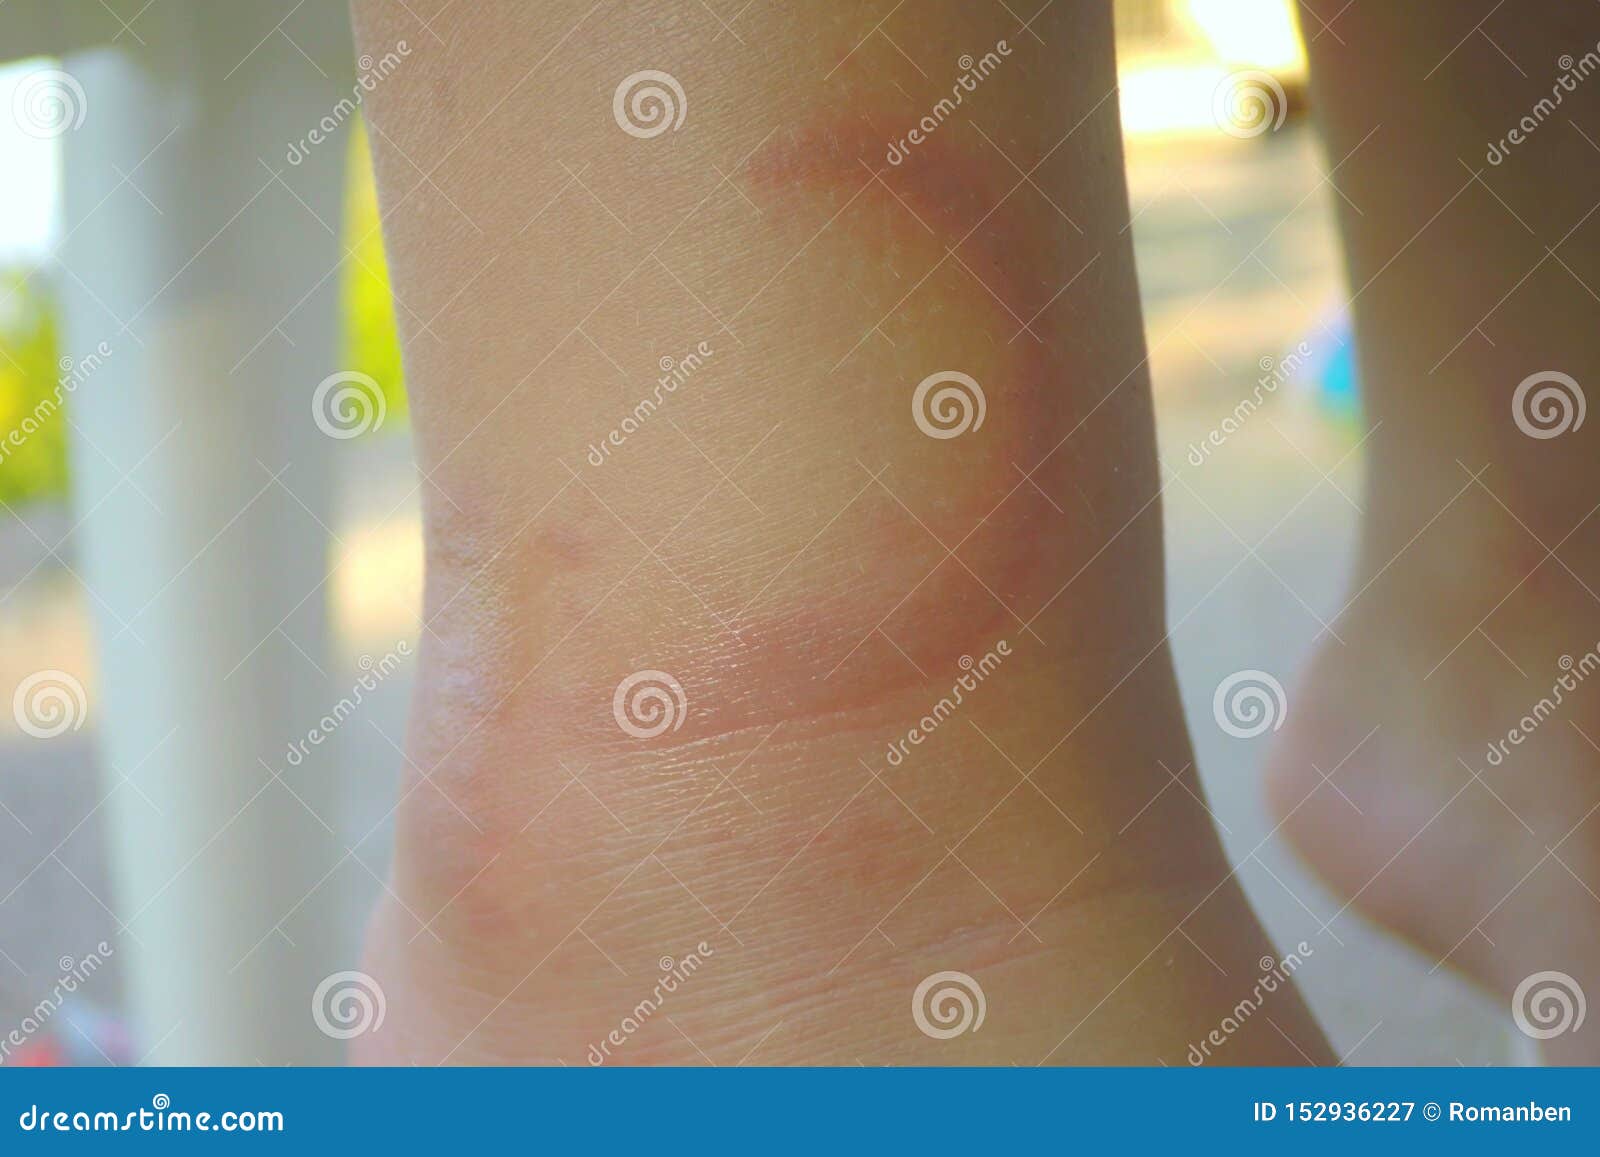 Bte of Jellyfish. Jelly Fish Marks on a Human Body Stock Image - Image of  pain, human: 152936227